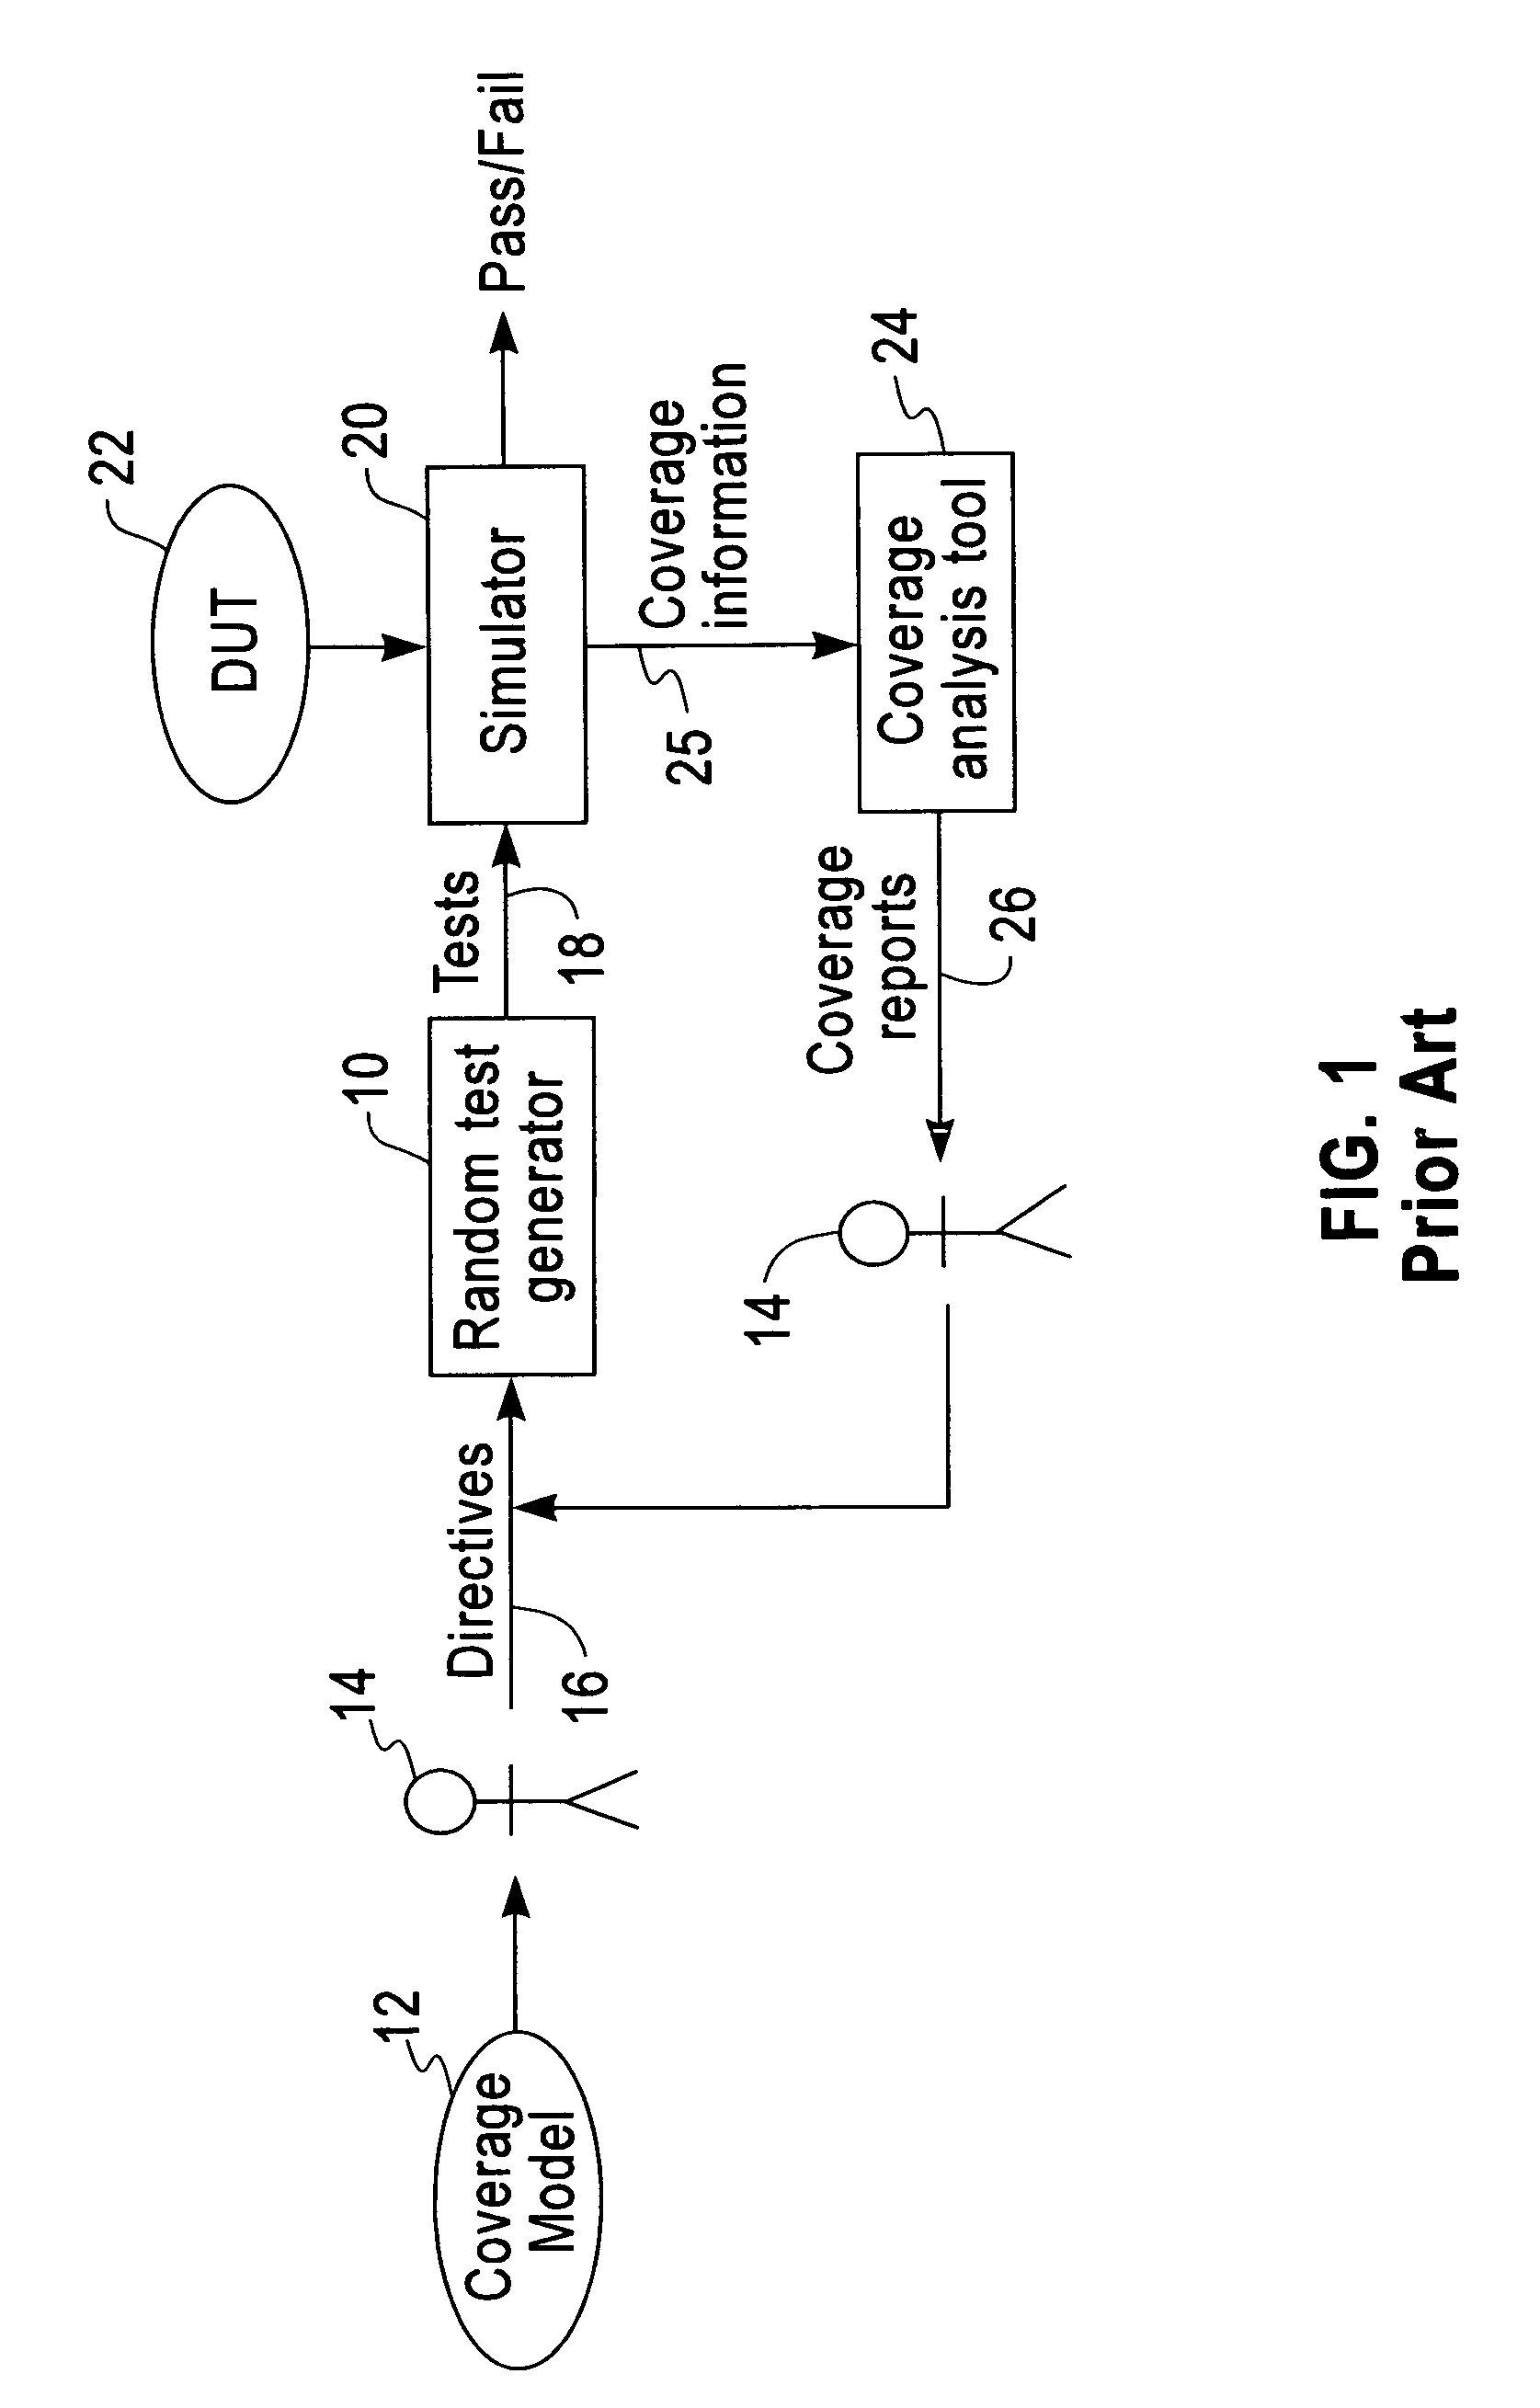 Apparatus and method for coverage directed test